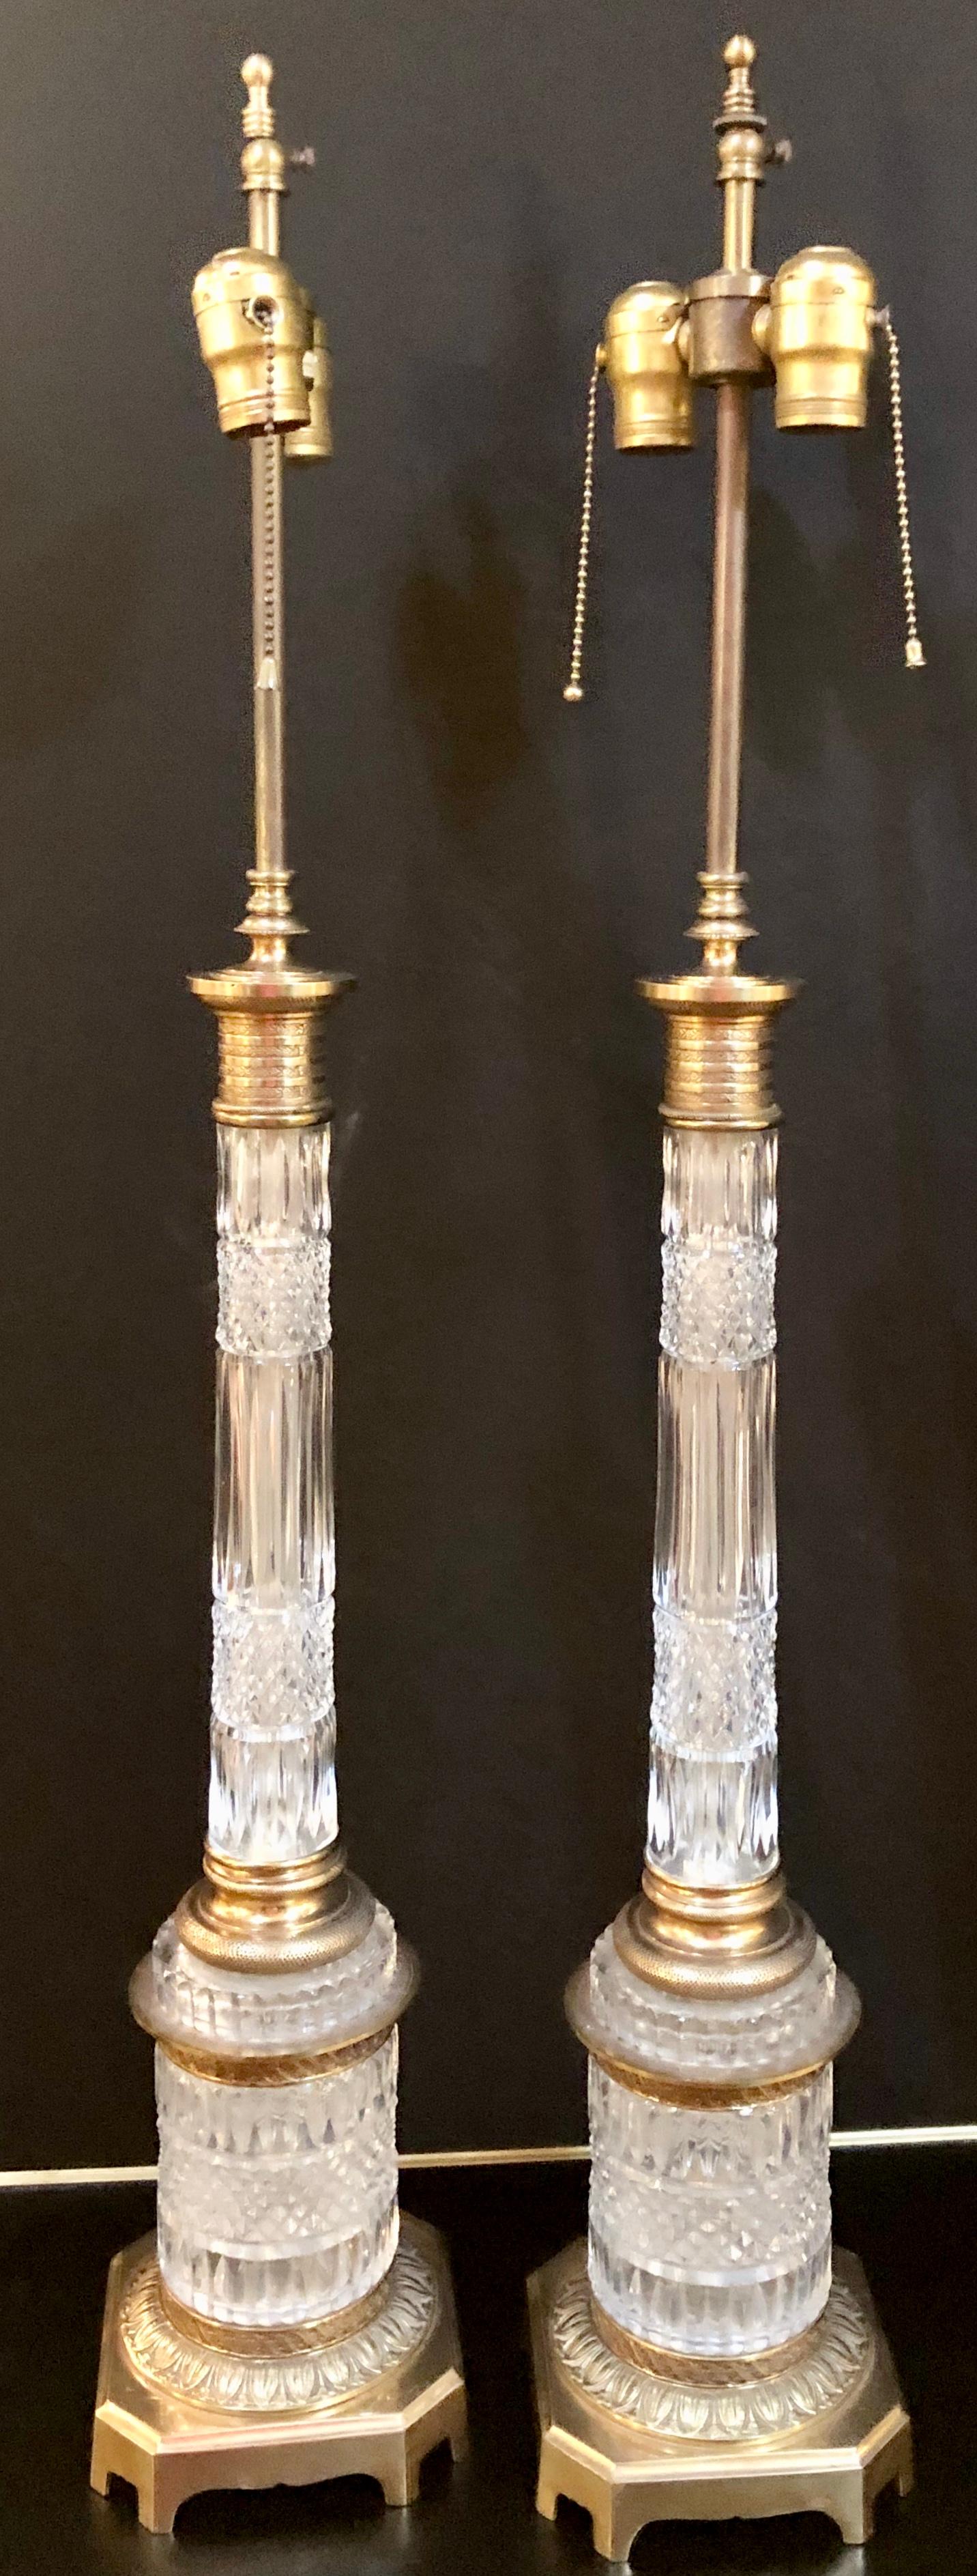 Pair of Warren Kessler signed Baccarat style bronze column form table lamps. Shades not included.

ES/ISXX.